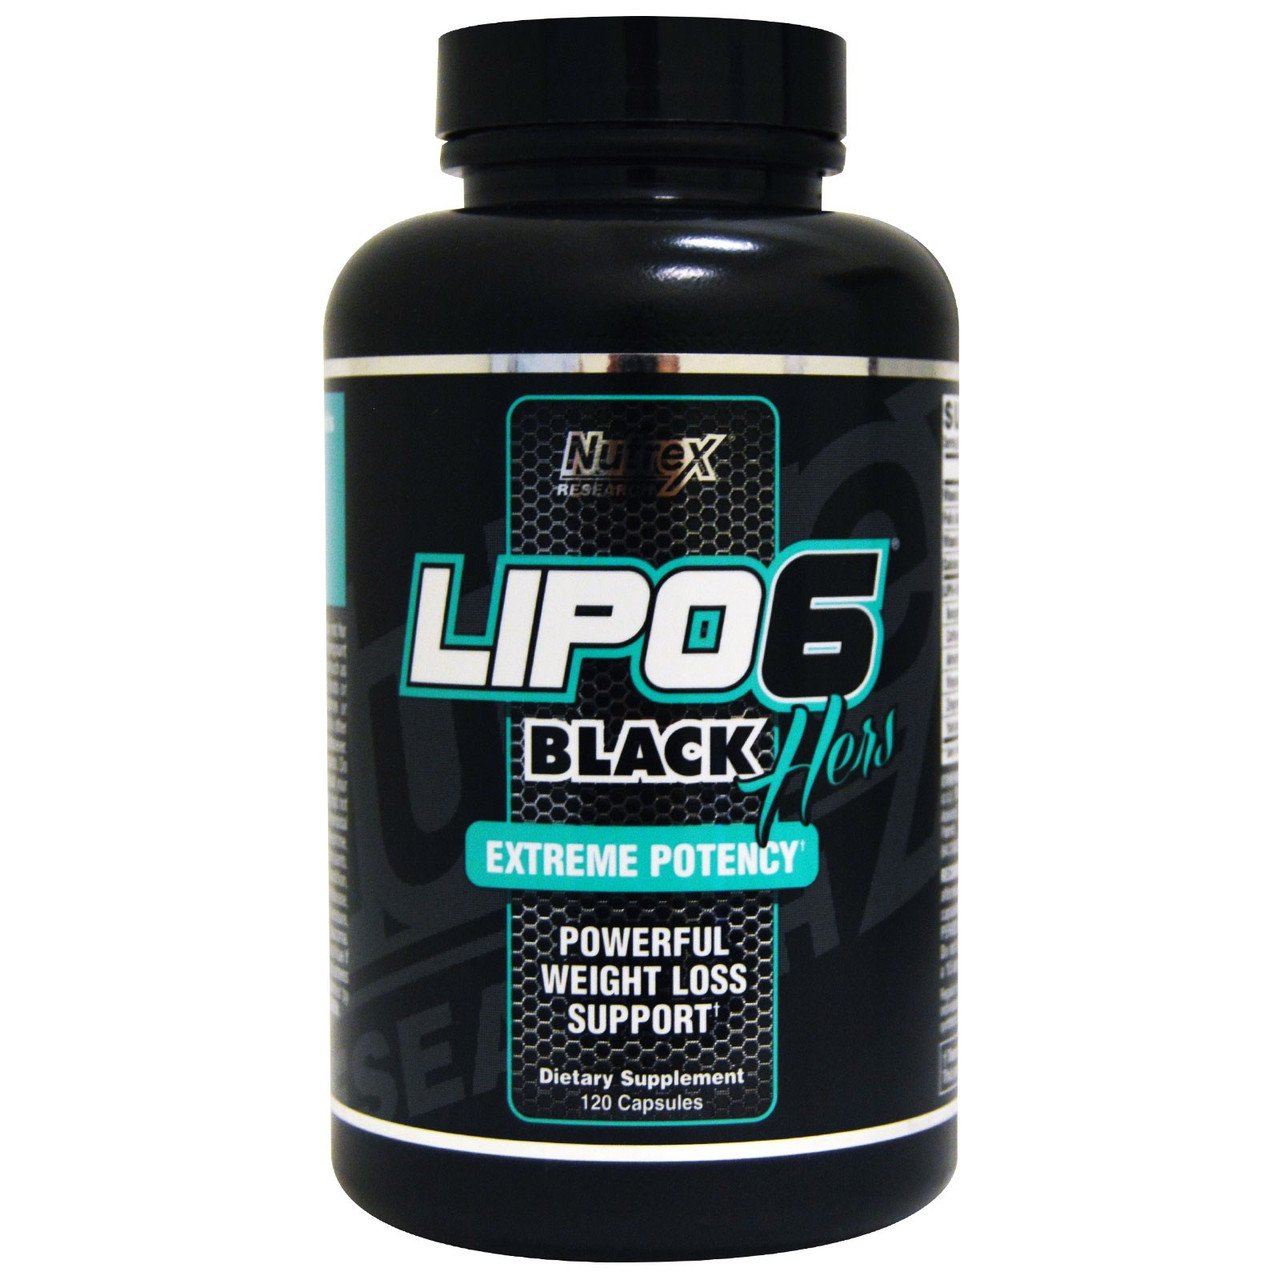 Lipo-6 Black Hers Extreme Potency Nutrex 120 Caps,  ml, Nutrex Research. Fat Burner. Weight Loss Fat burning 